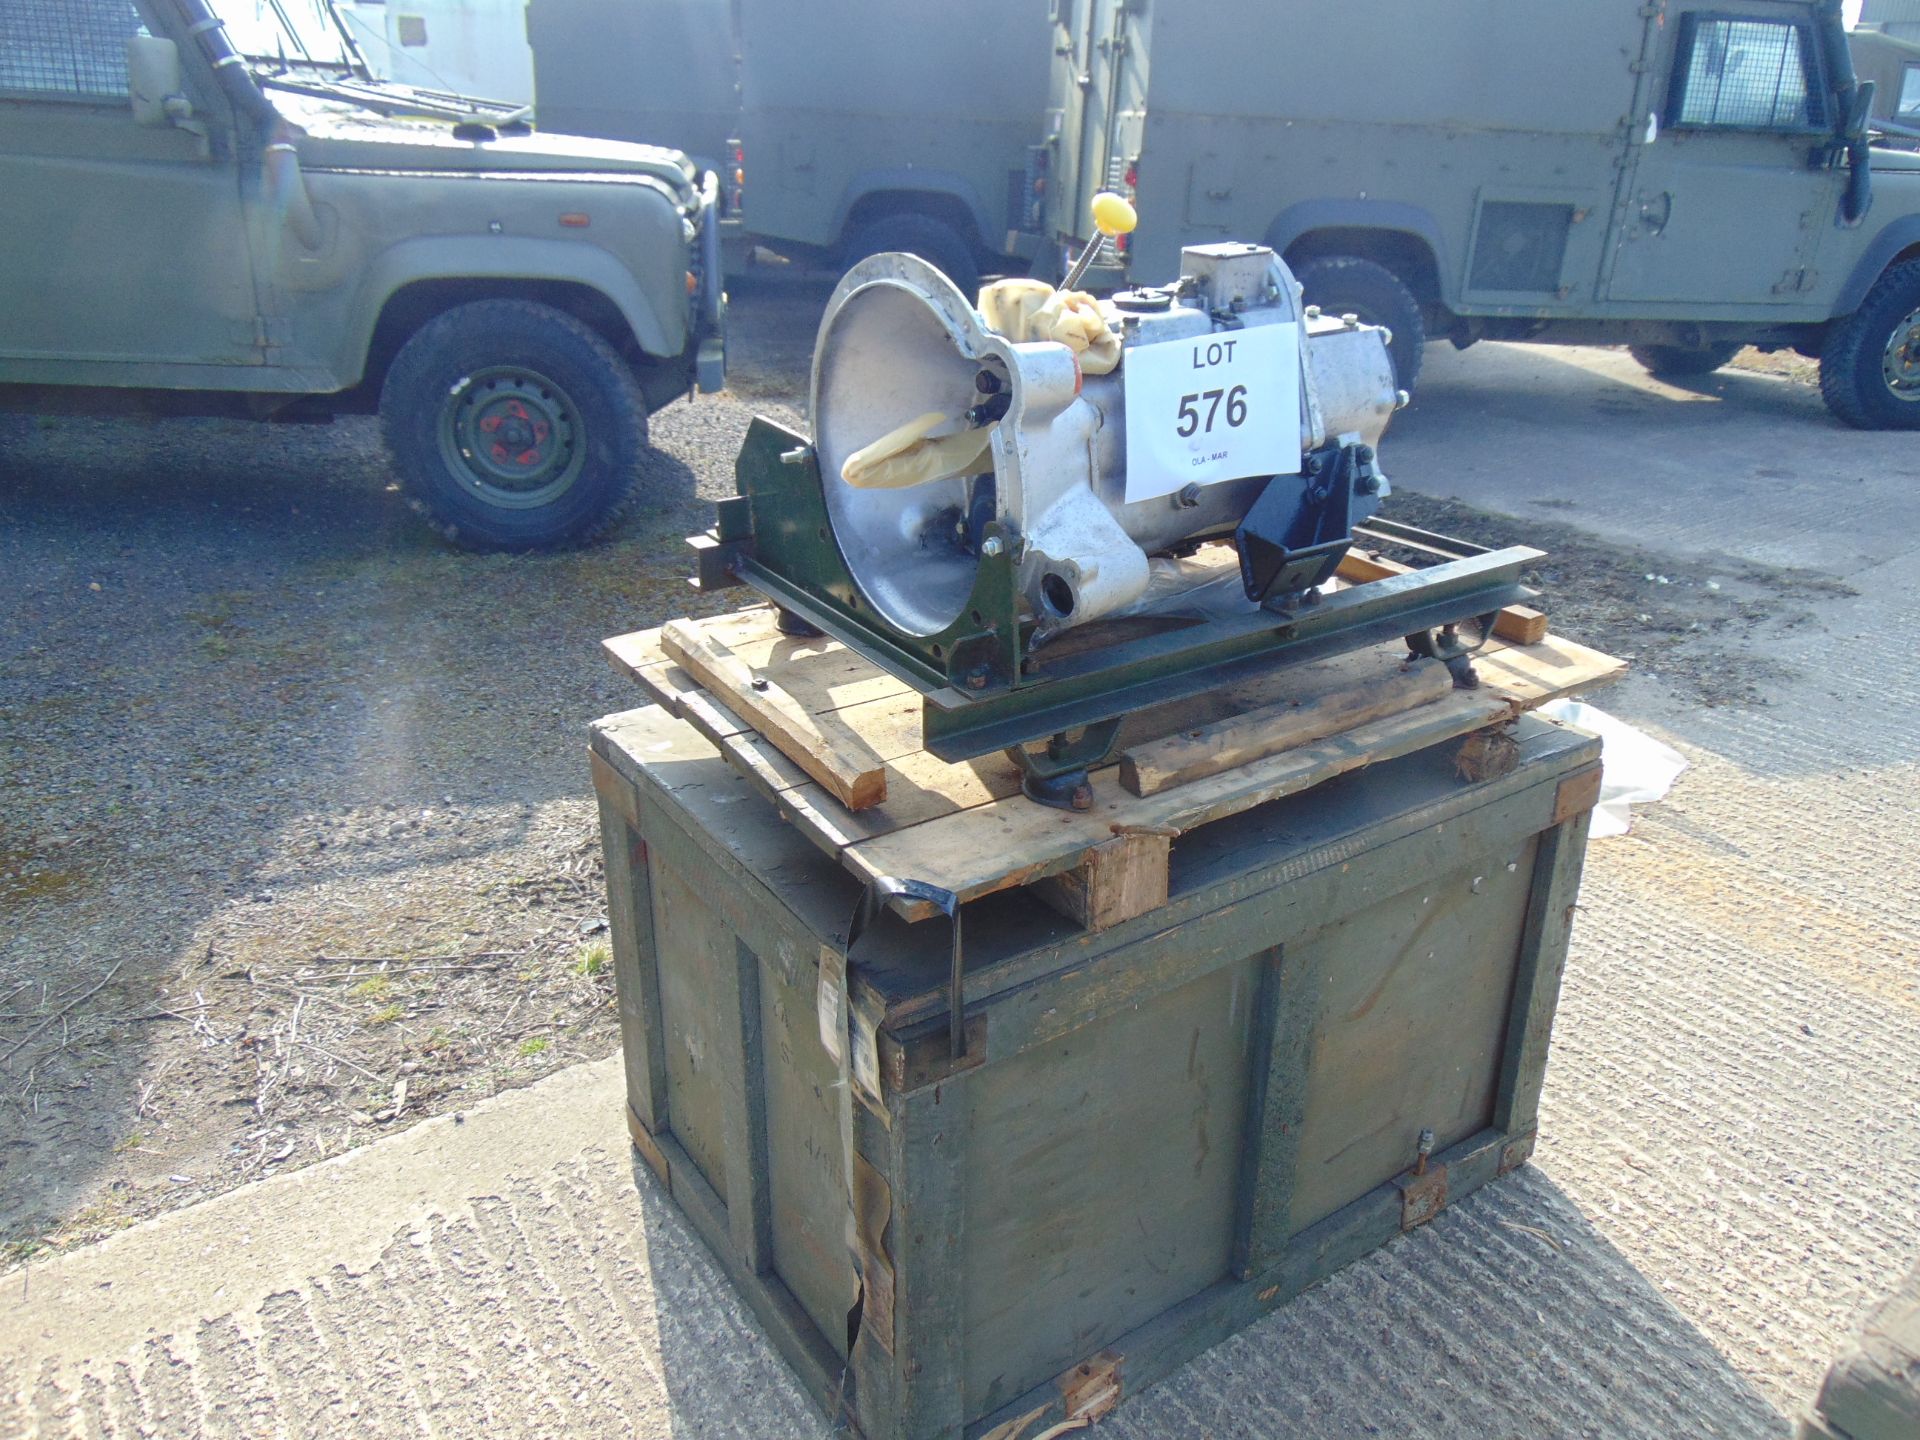 Army Recon Series Gearbox c/w Ancillaries as shown in Original Crate - Image 14 of 20